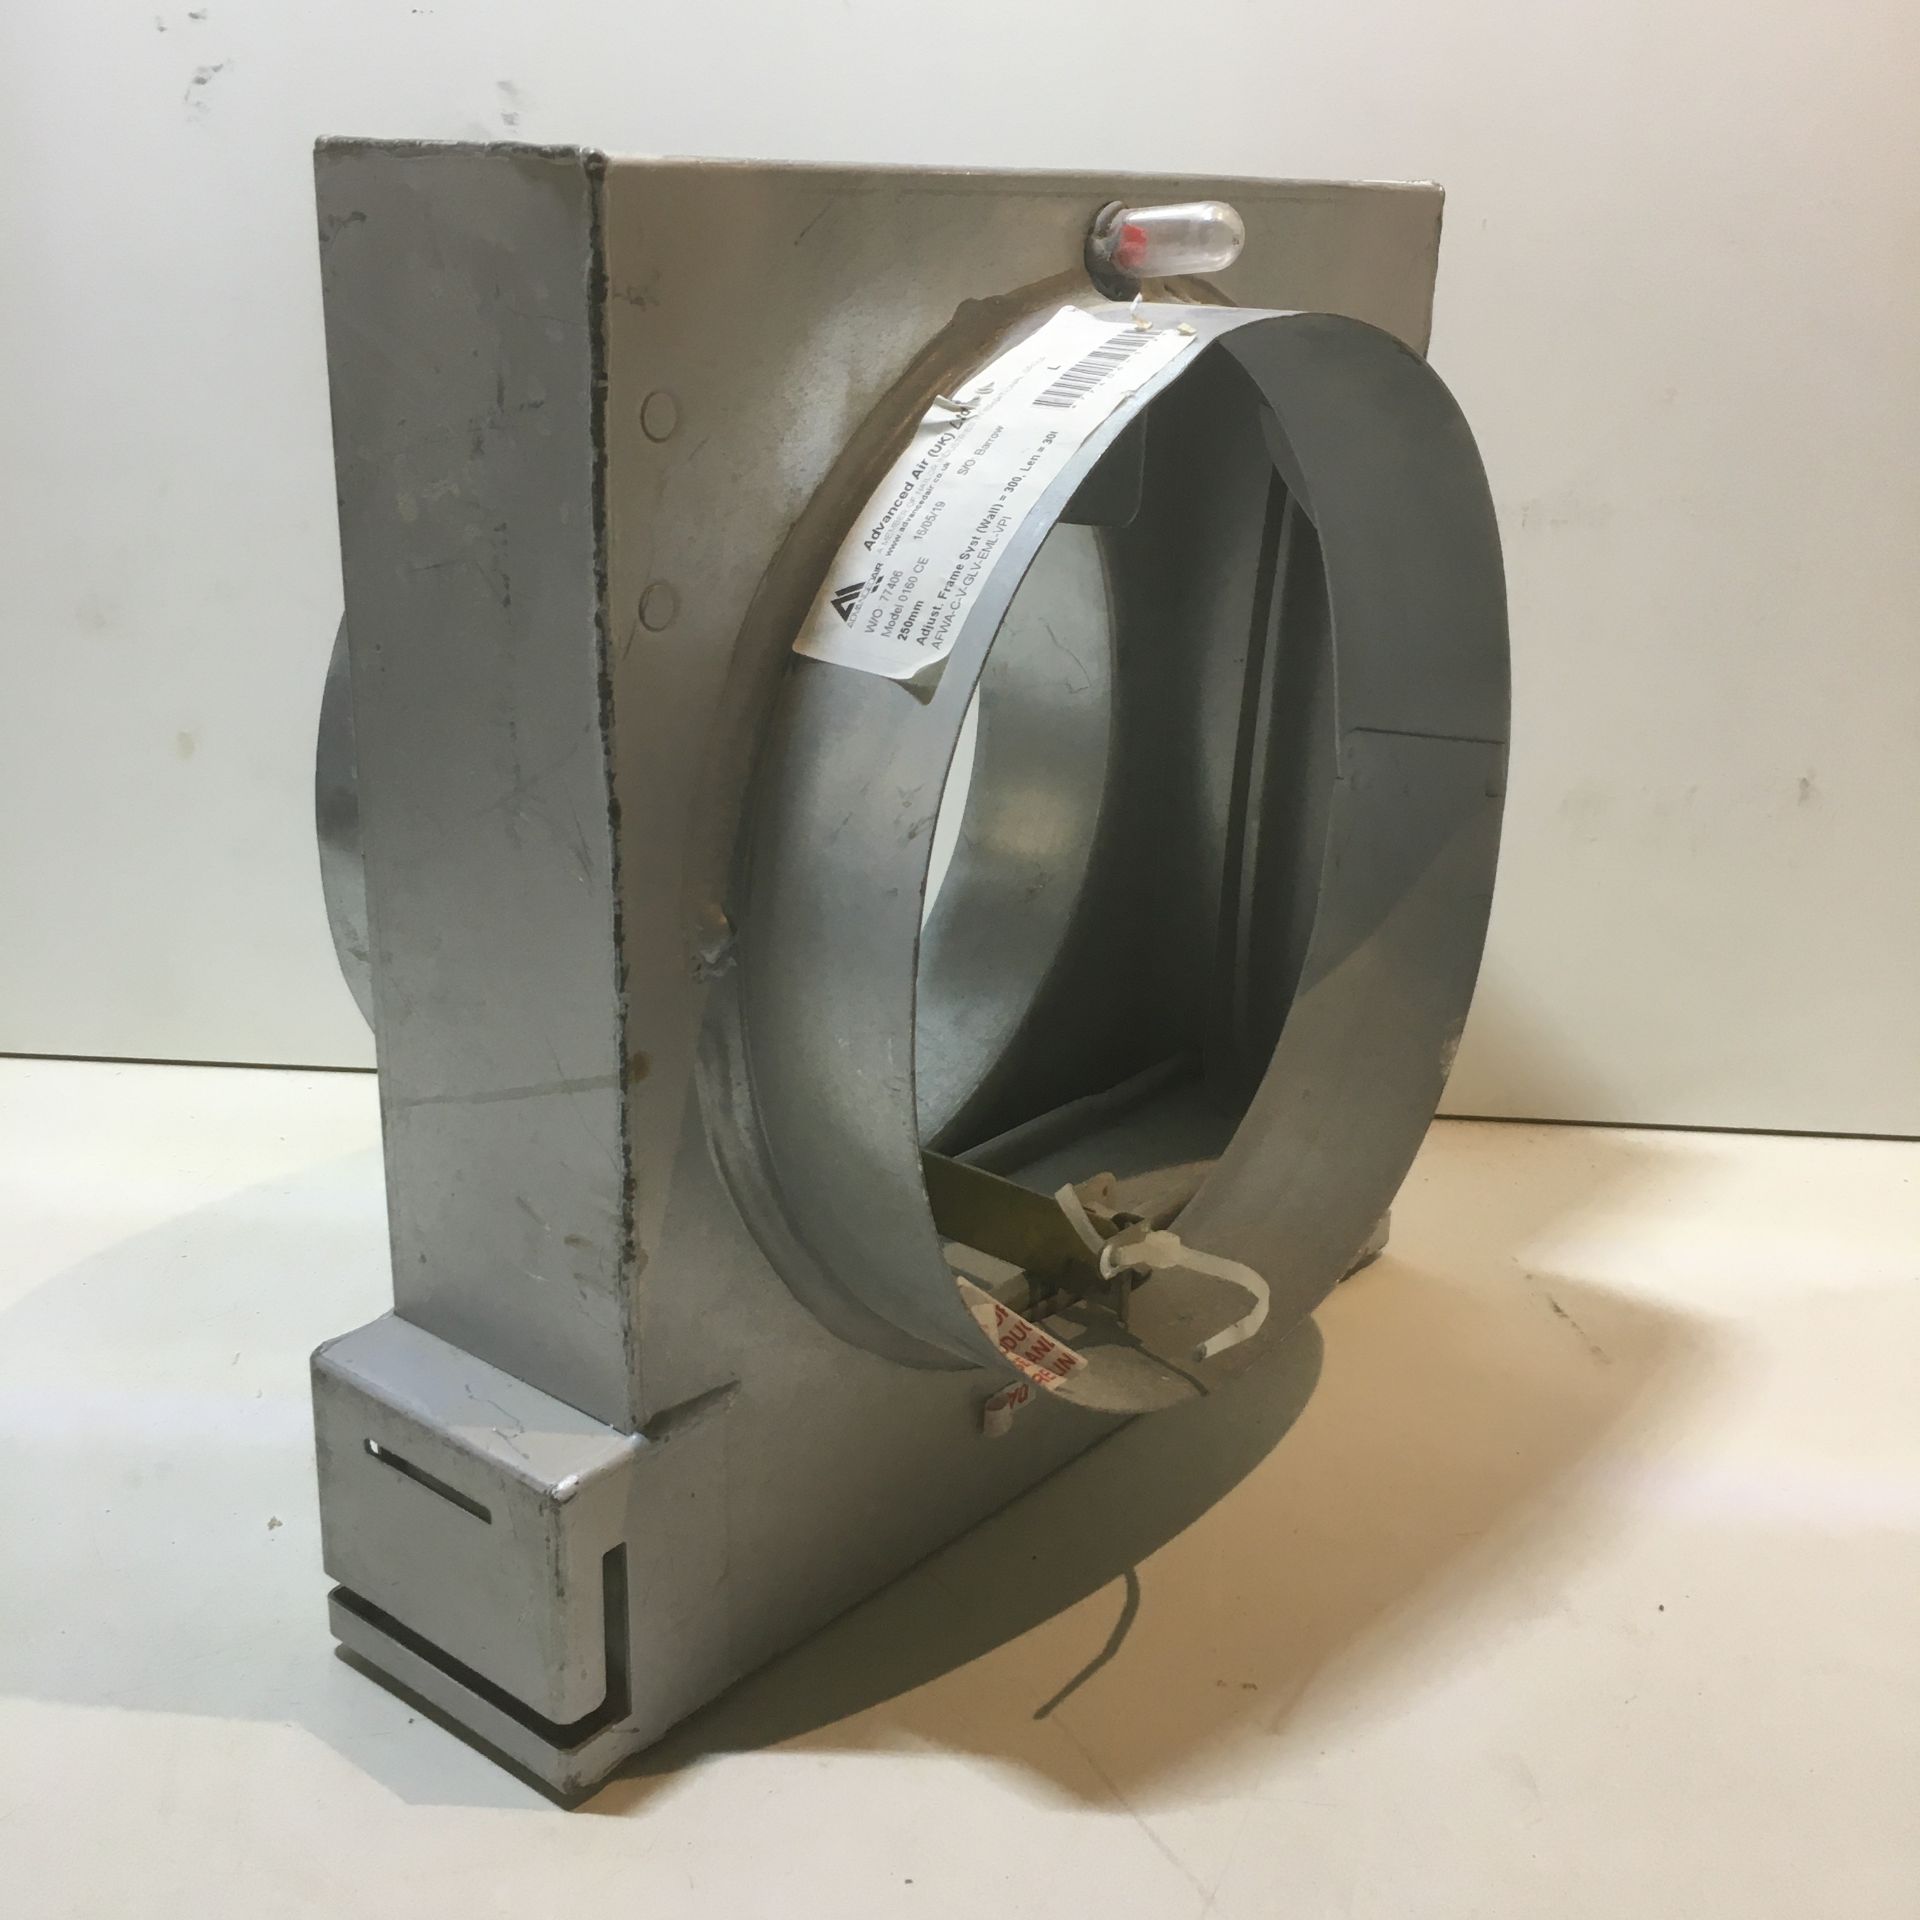 Advanced Air 0160 CE Curtain Fire Damper For Ventilation Systems - Image 2 of 5